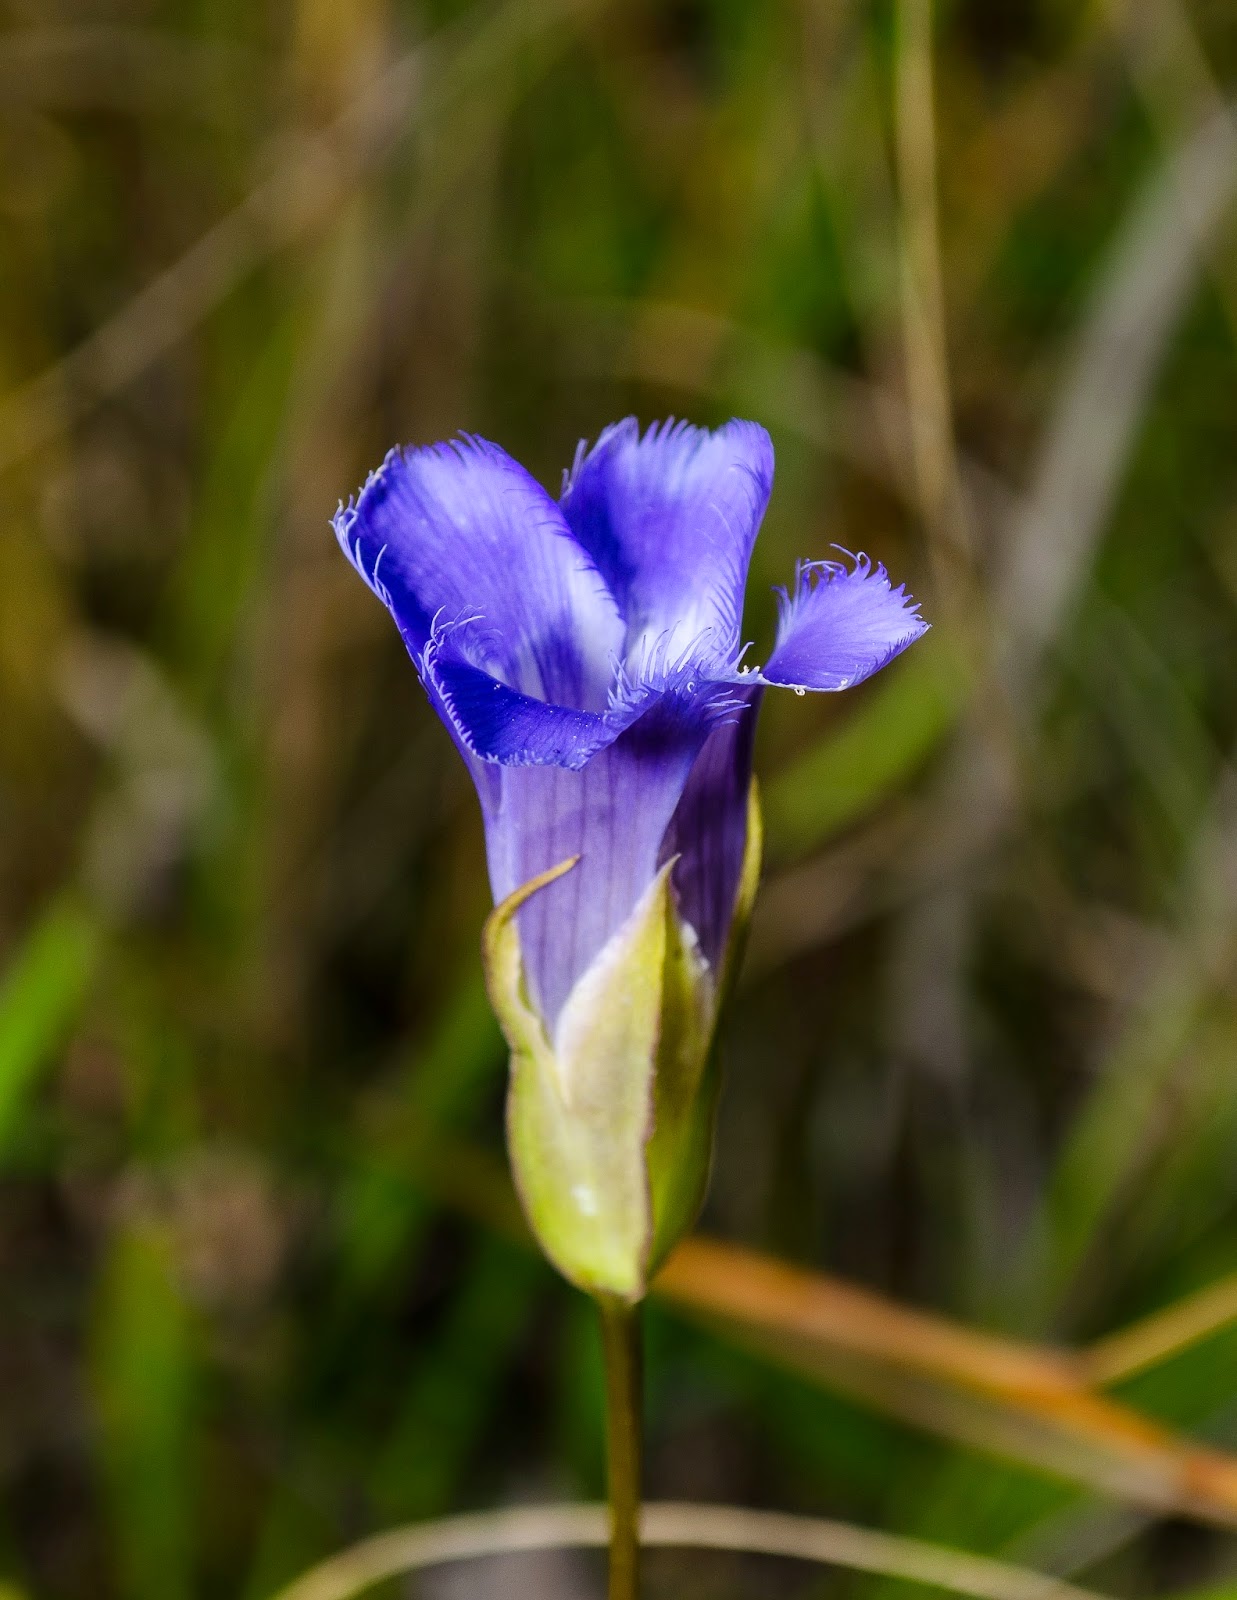 Greater Fringed Gentian Ohio